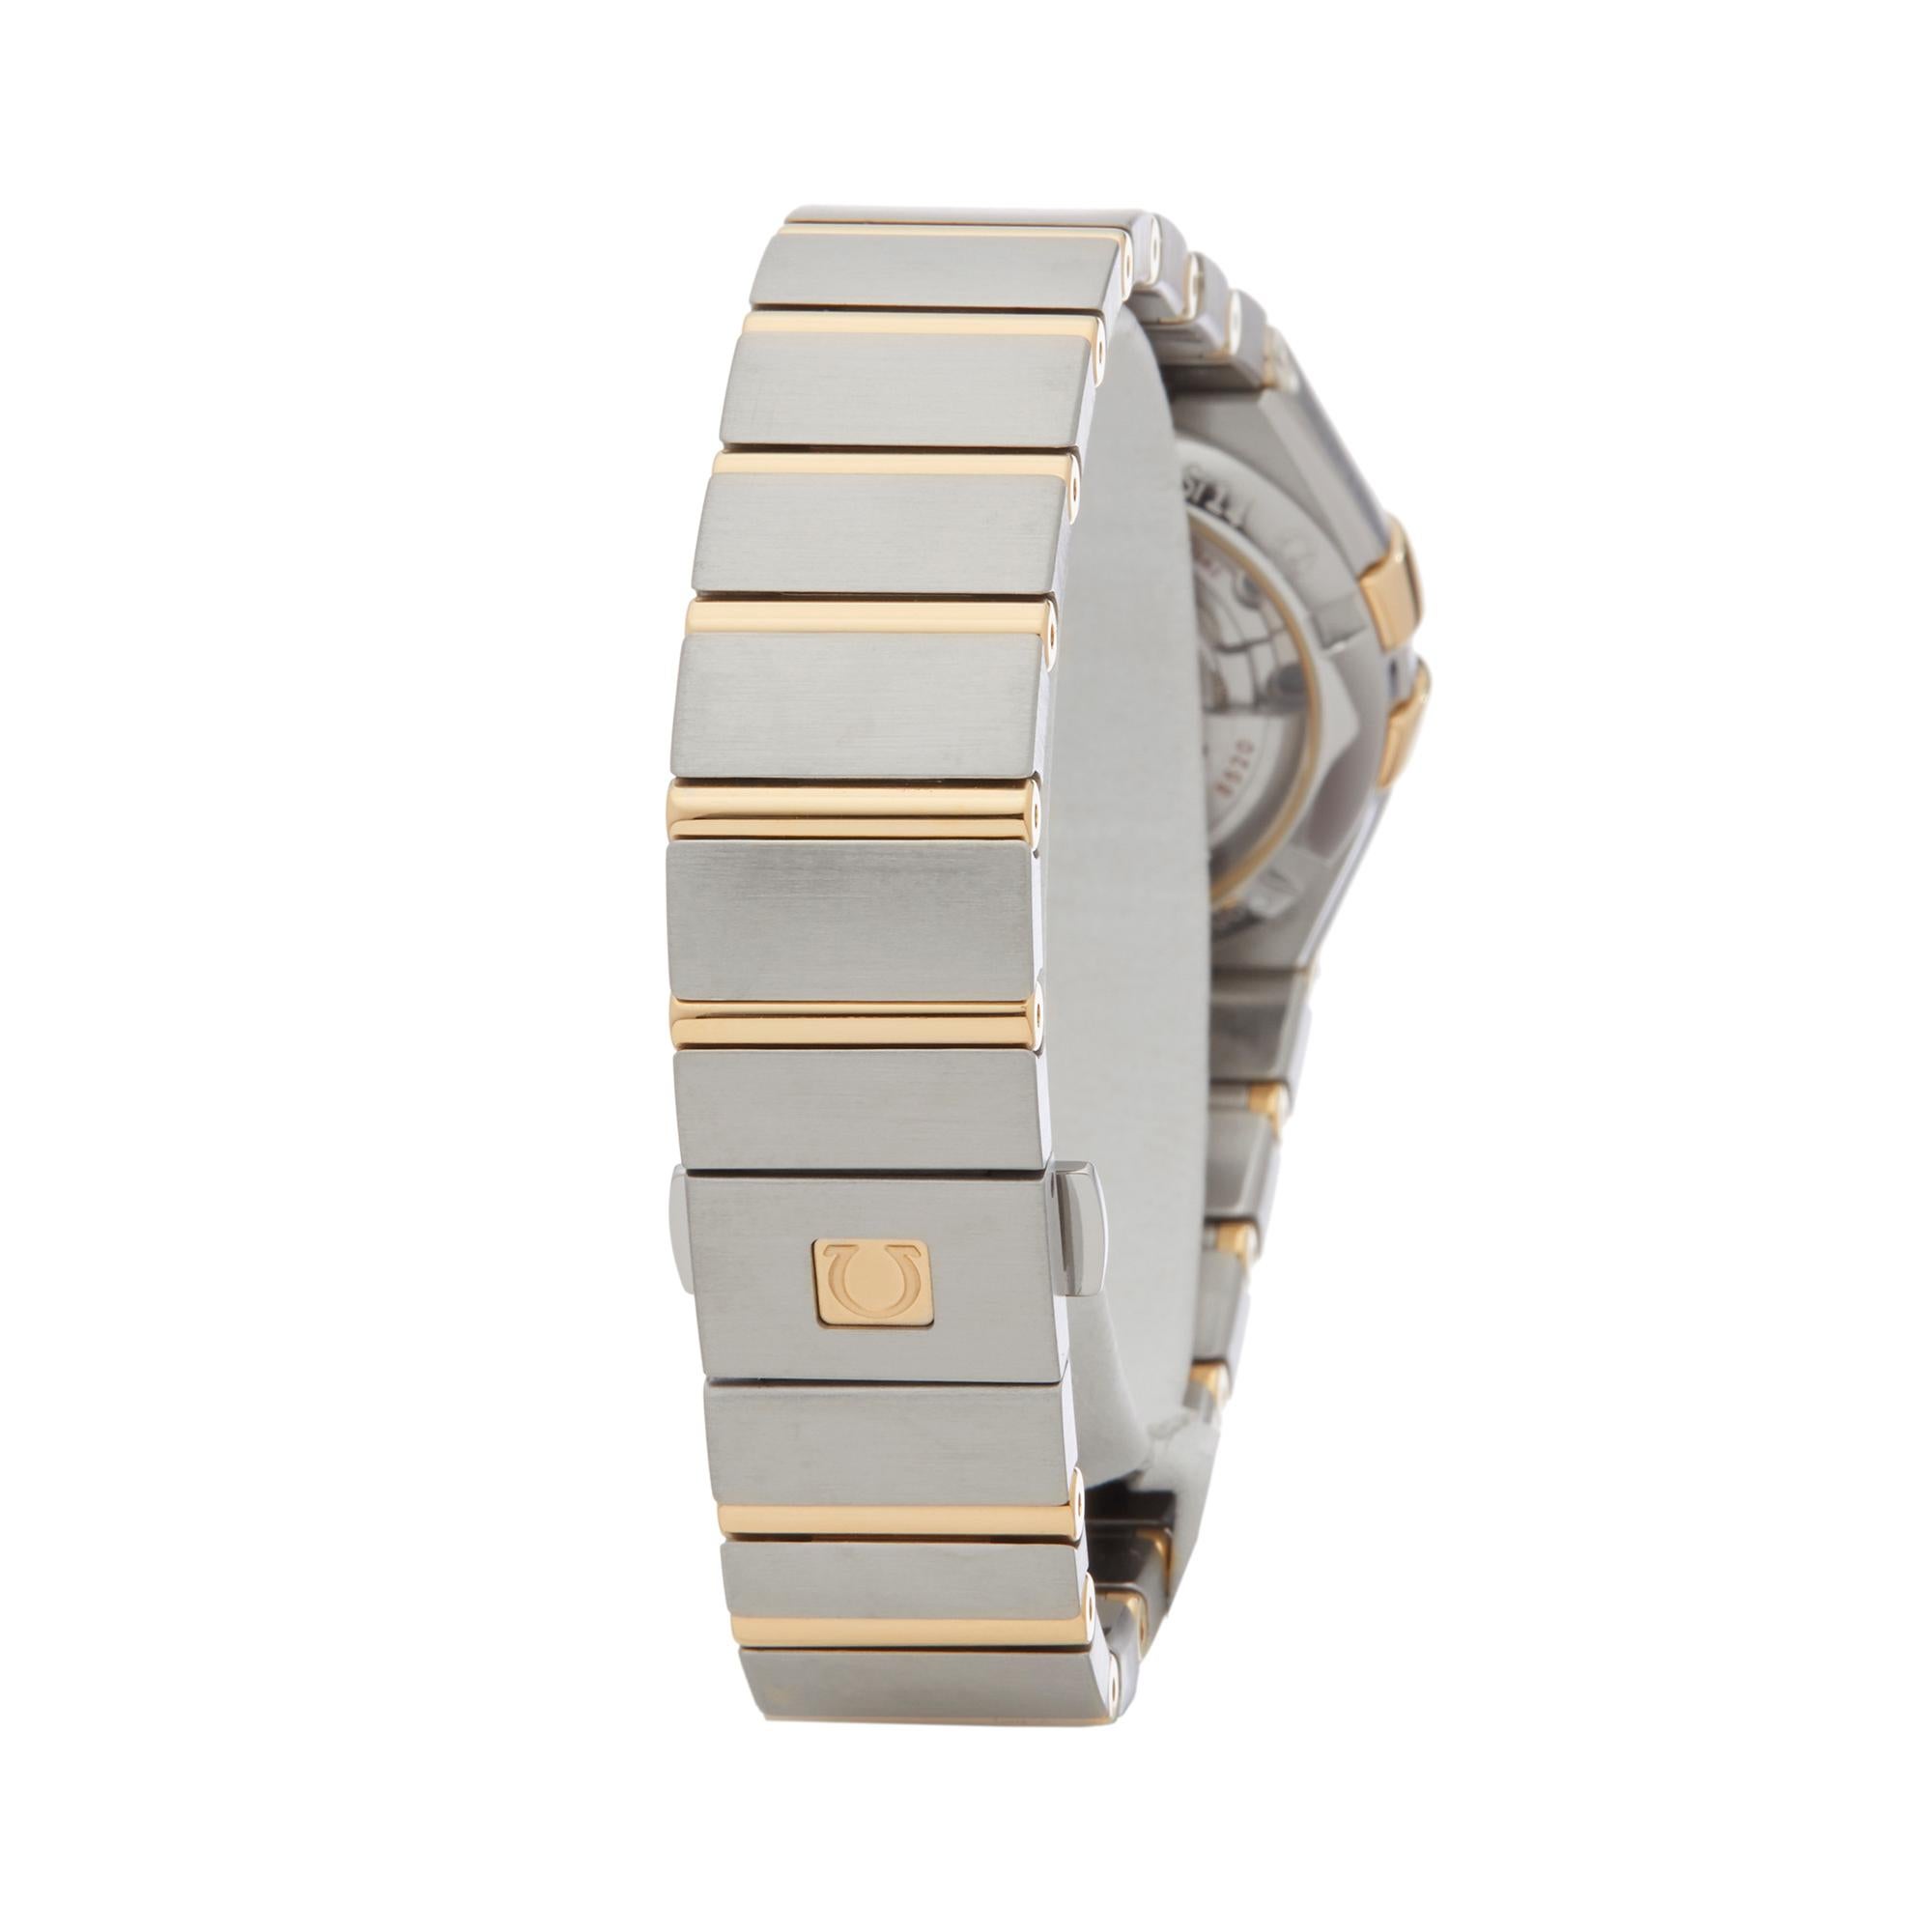 Omega Constellation Diamond Stainless Steel and Yellow Gold 123.20.27.20.57.002 1